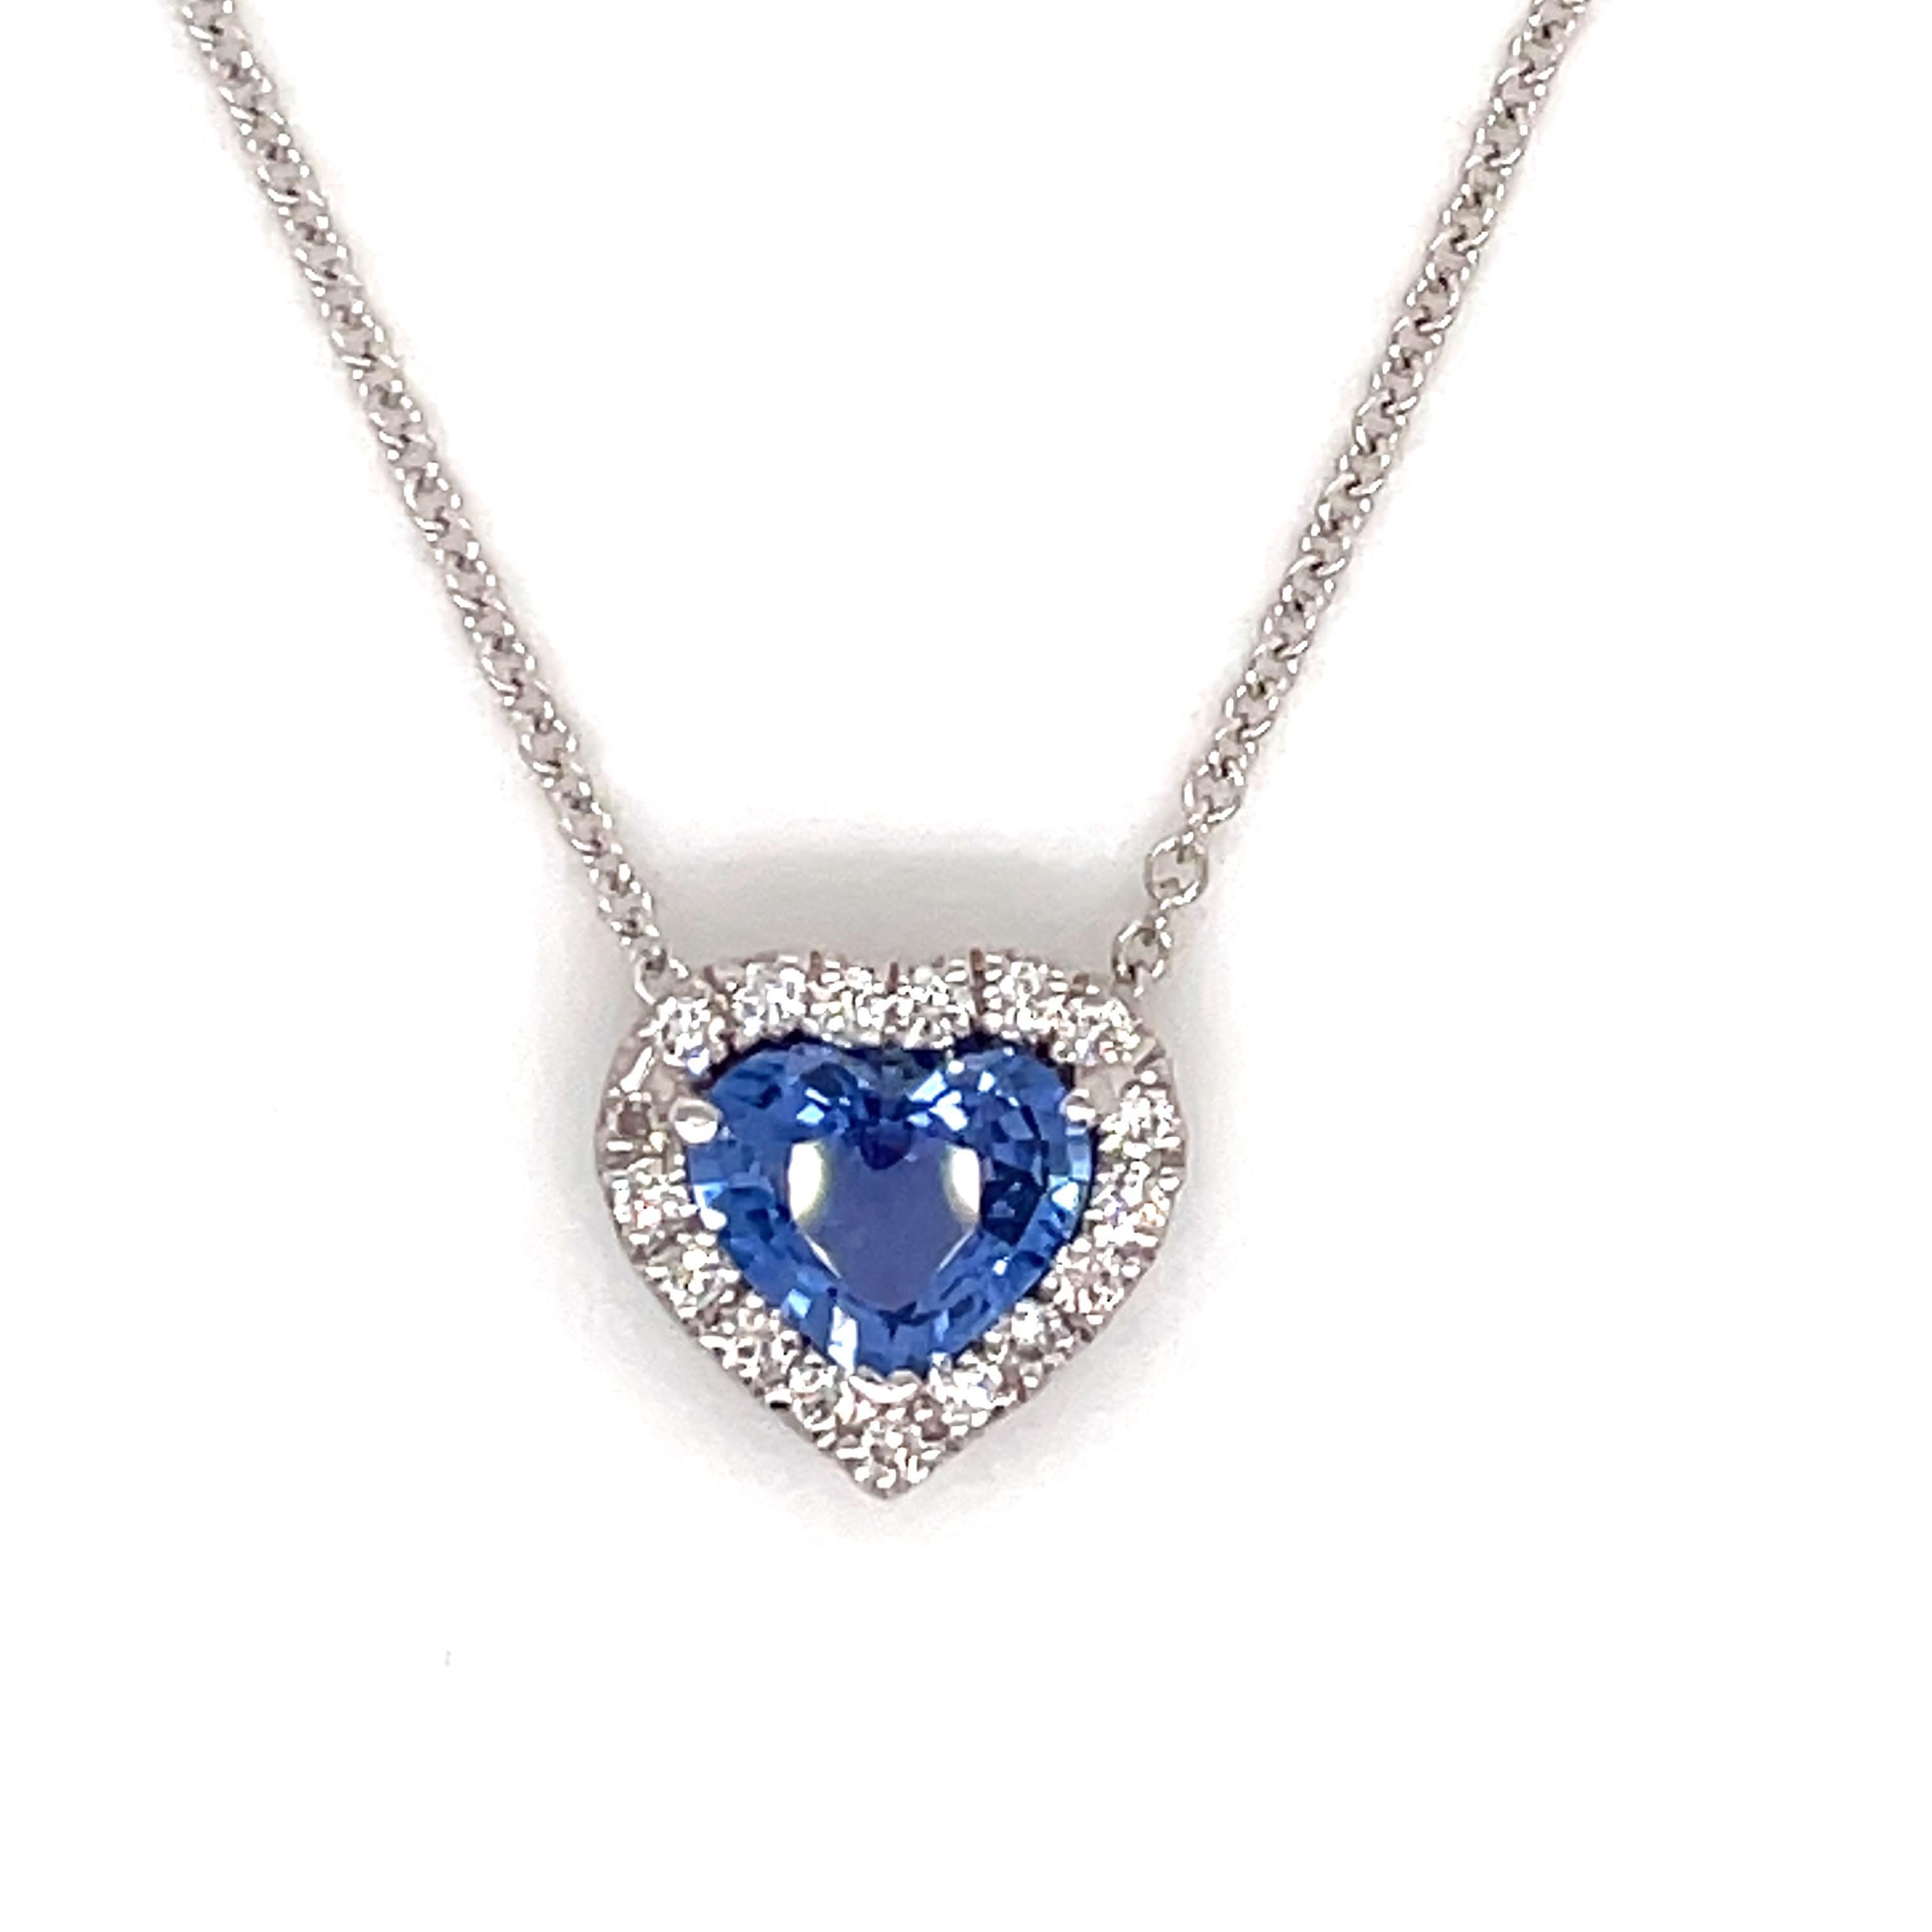 One blue heart shape Sapphire weighing 1.32 carats flanked with a diamond halo weighing 0.23 carats, in 18k white gold.
Color G-H
Clarity SI